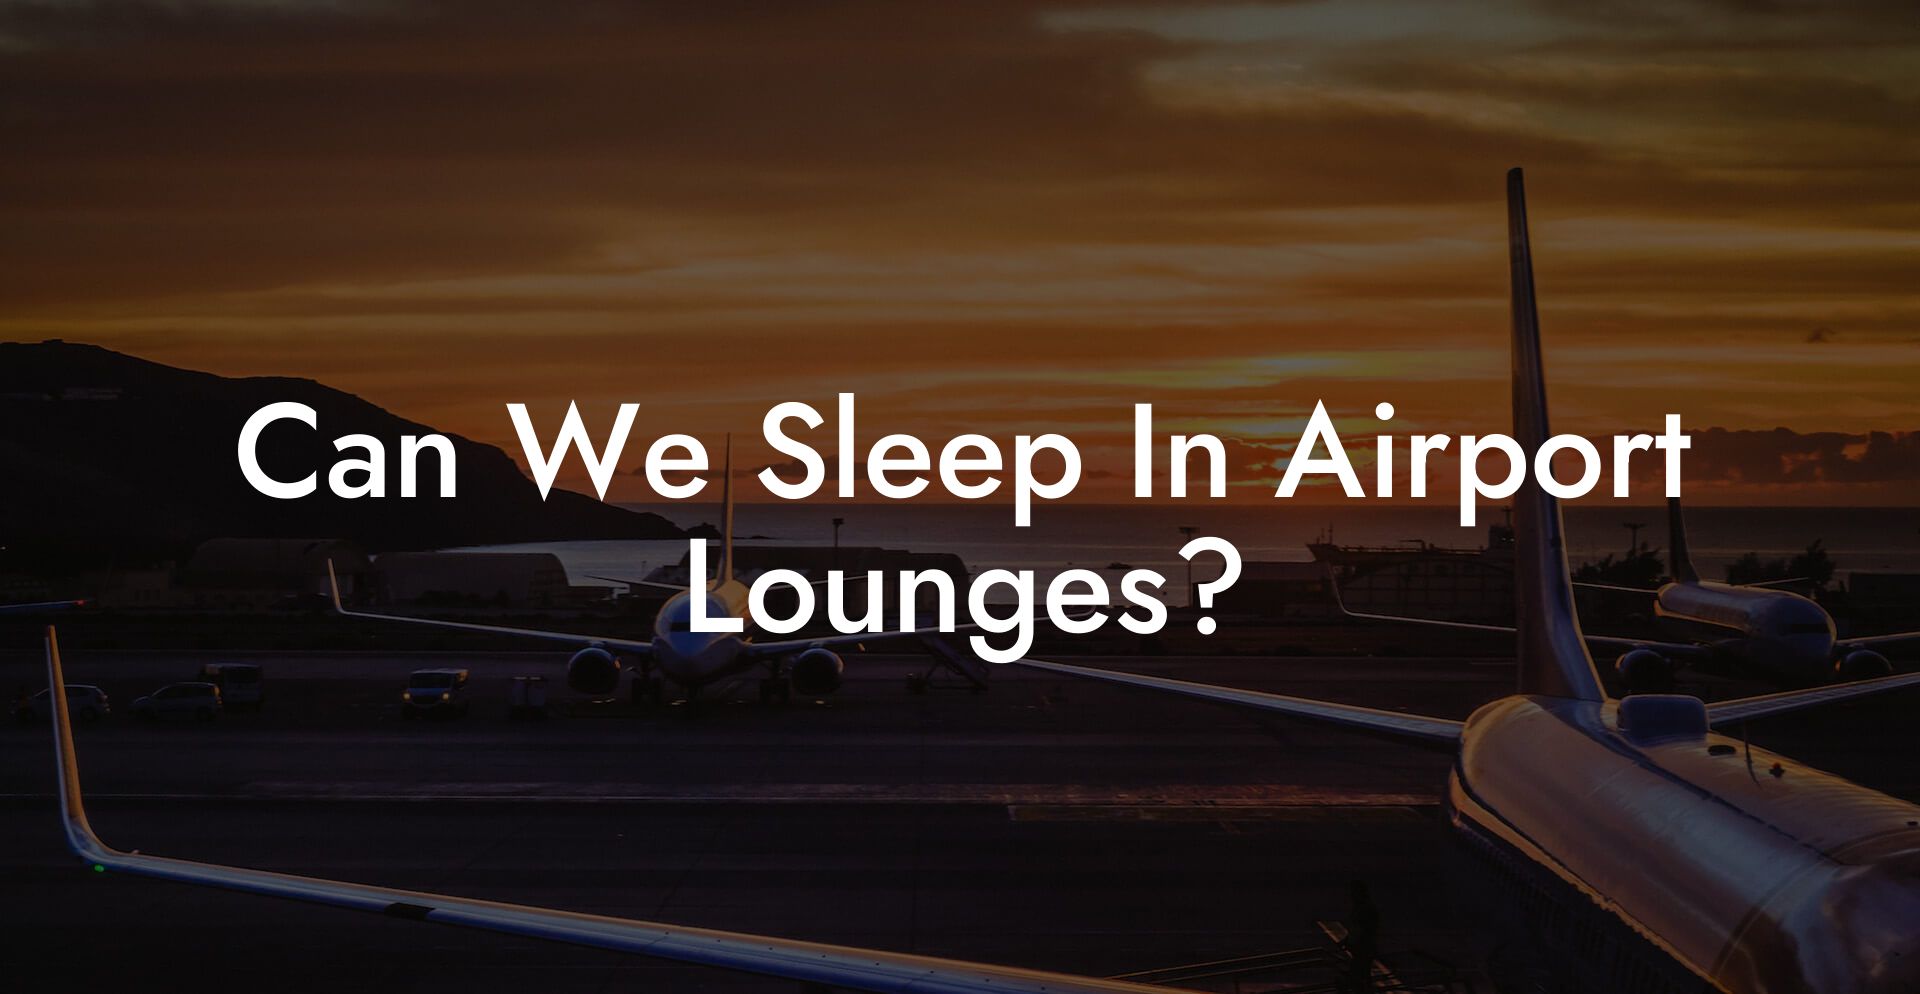 Can We Sleep In Airport Lounges?